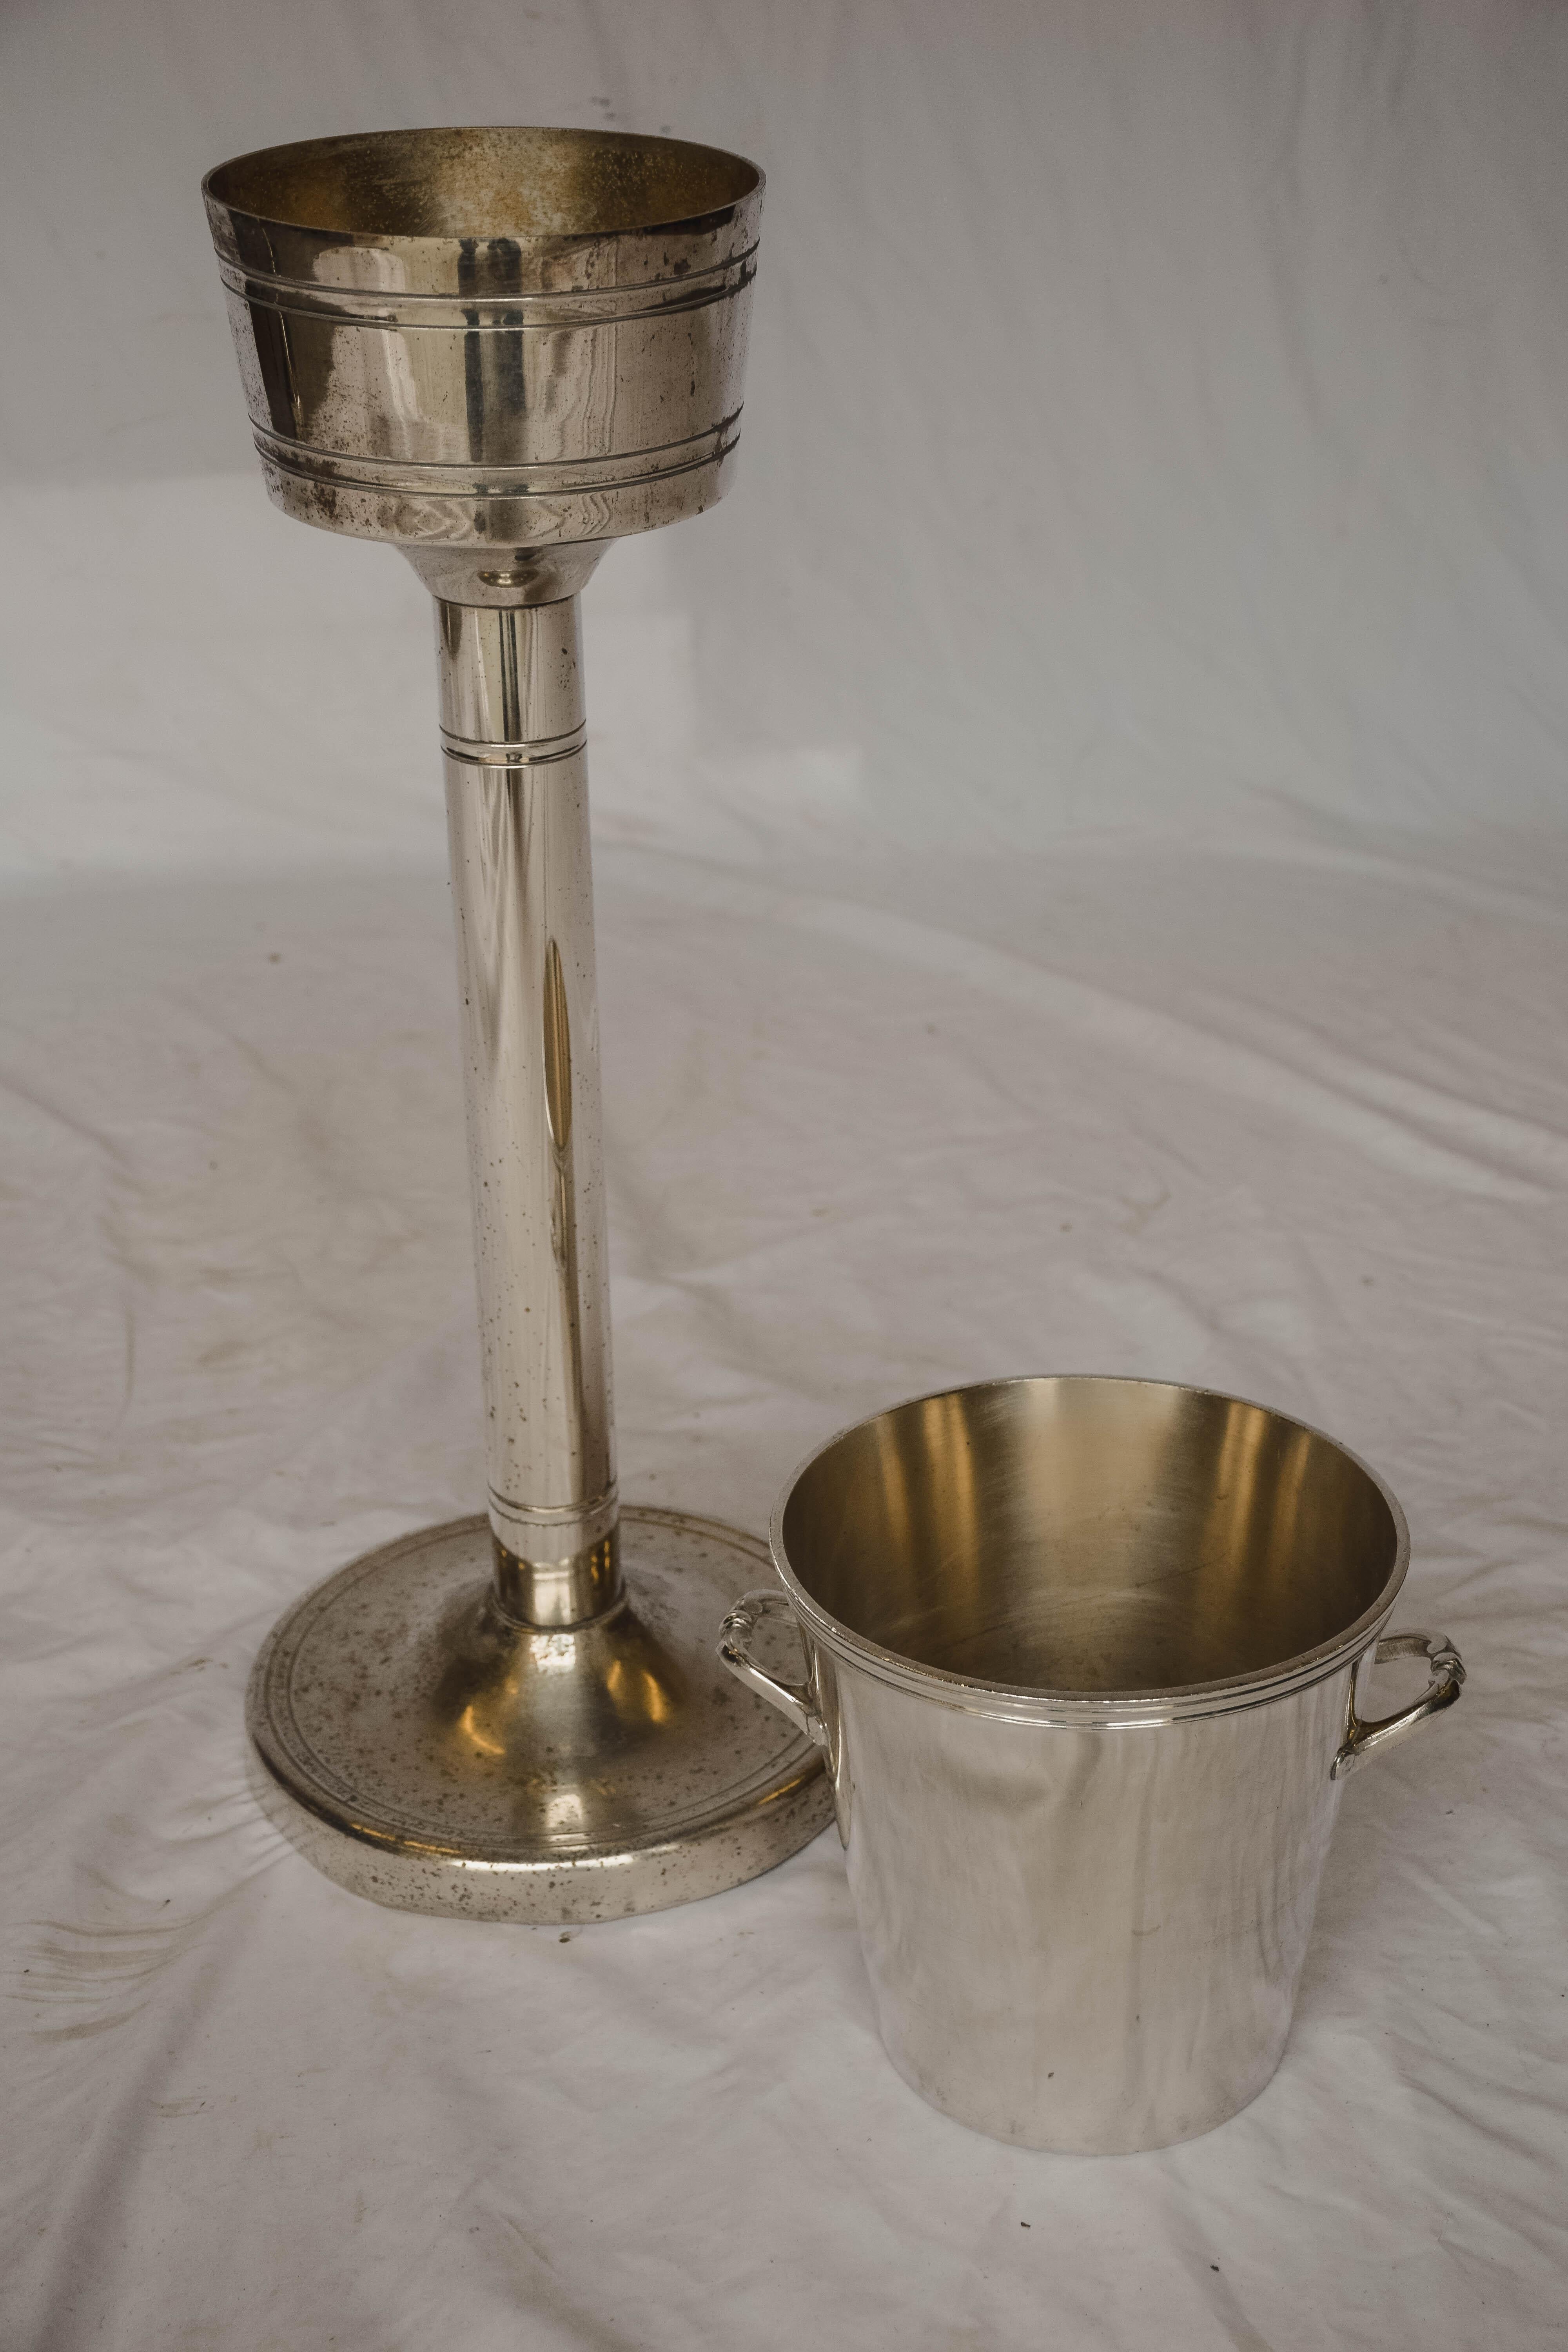 Hotel silver French Champagne bucket with stand from the Lyon region of France. Most likely used in a restaurant or hotel. The bucket itself is easily removed from the stand as seen in the photos.